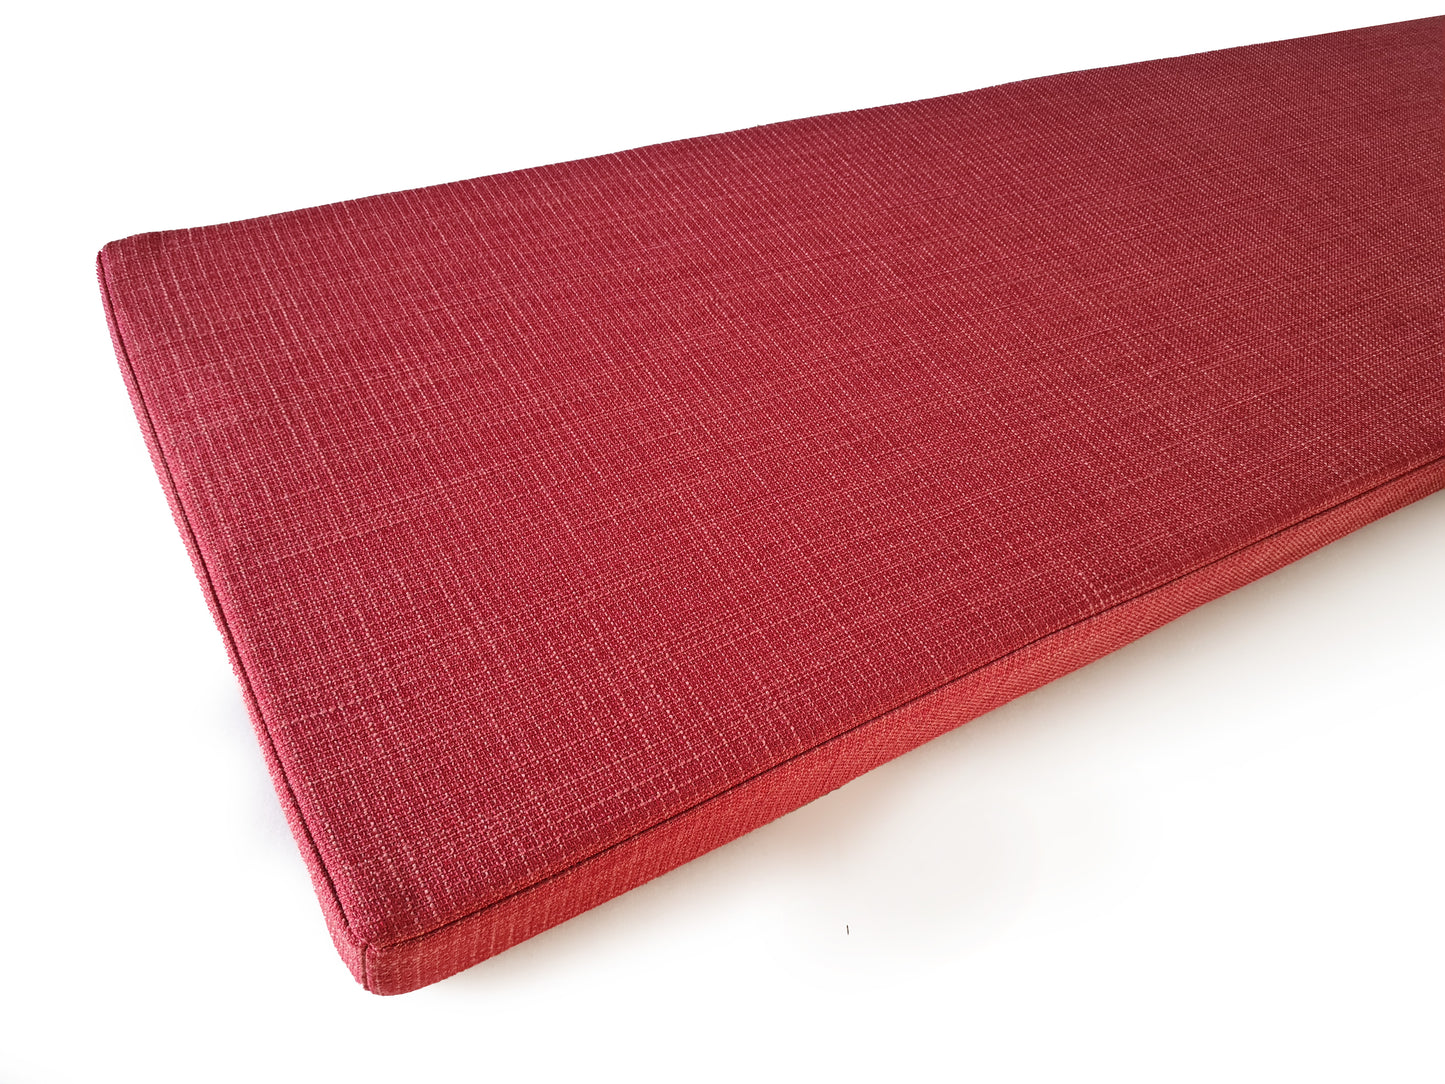 Firm Foam Filled Bench Cushion (6cm thickness)